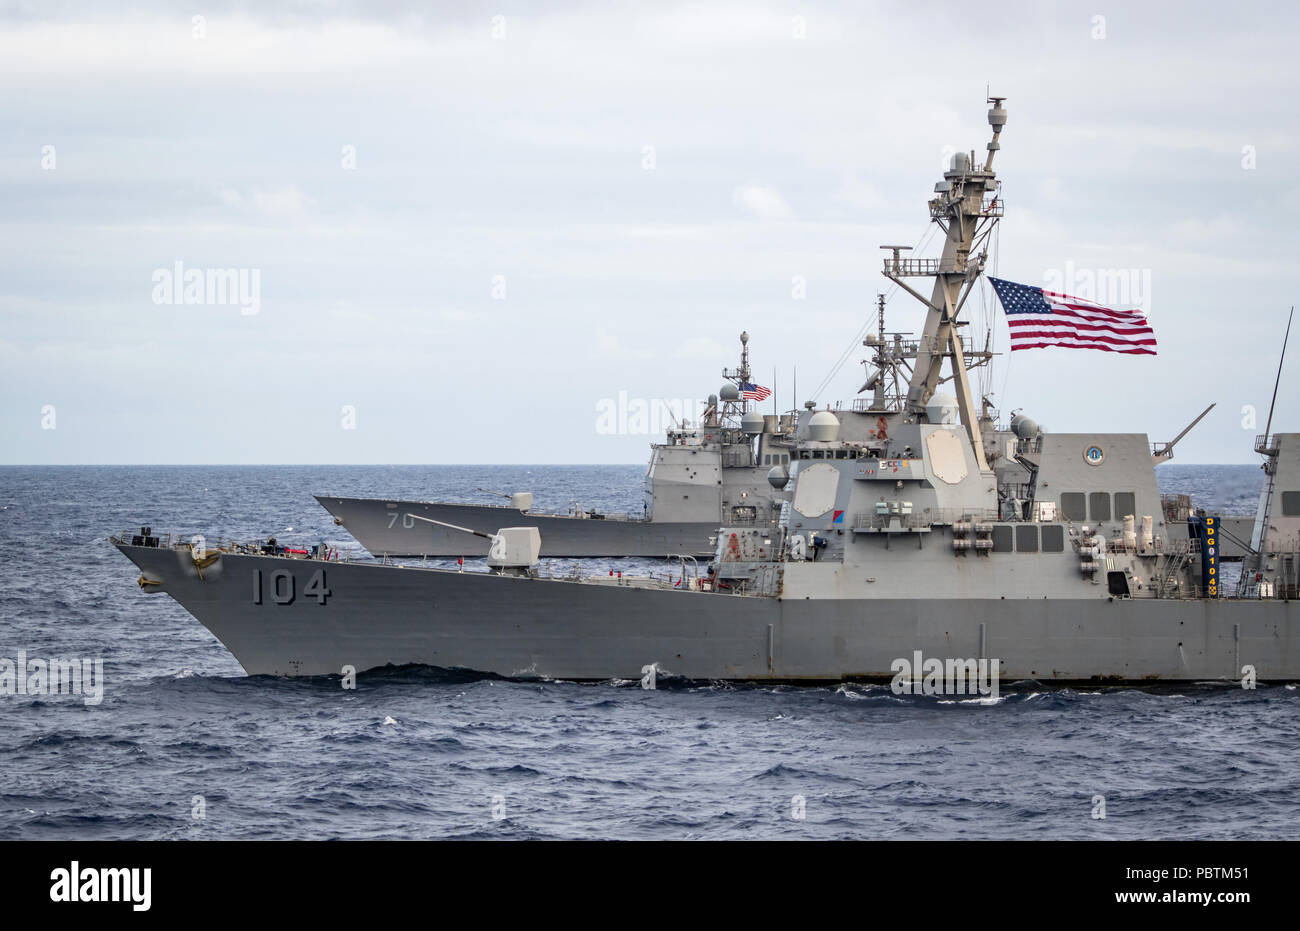 180726-N-LI768-1324 PACIFIC OCEAN (July 26, 2018) – Guided-missile destroyer USS Sterett (DDG 104) and guided-missile cruiser USS Lake Erie (CG 70) transit the Pacific Ocean while underway during the Rim of the Pacific (RIMPAC) exercise, July 26. Twenty-five nations, 46 ships, five submarines, and about 200 aircraft and 25,000 personnel are participating in RIMPAC from June 27 to Aug. 2 in and around the Hawaiian Islands and Southern California. The world's largest international maritime exercise, RIMPAC provides a unique training opportunity while fostering and sustaining cooperative relation Stock Photo